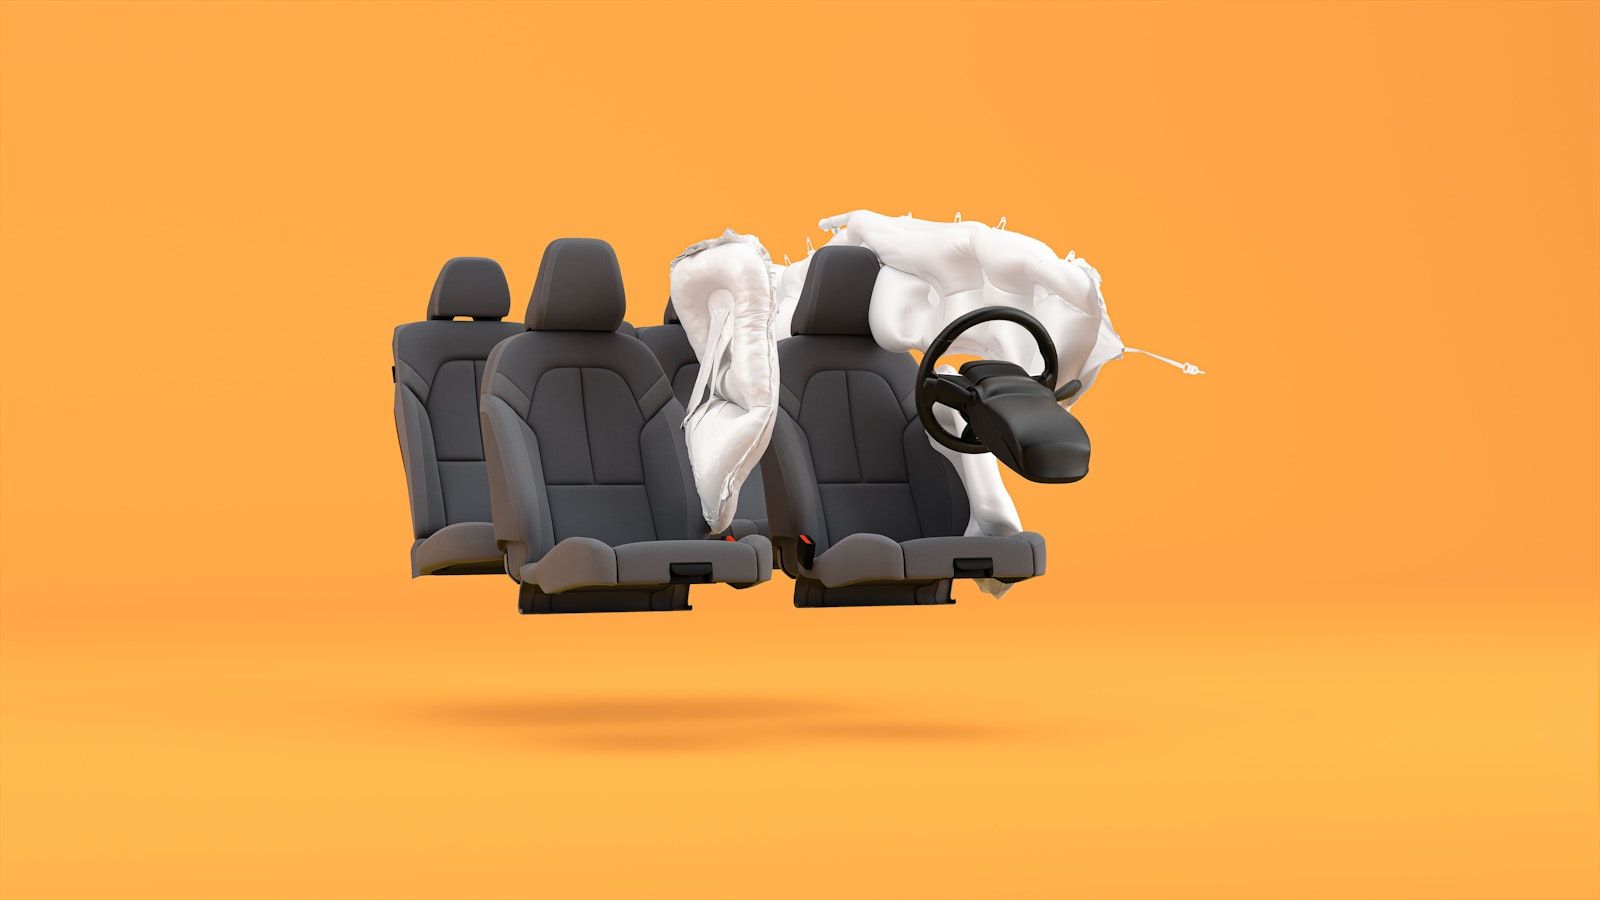 Orange background with four floating car seats showing inner-side airbags